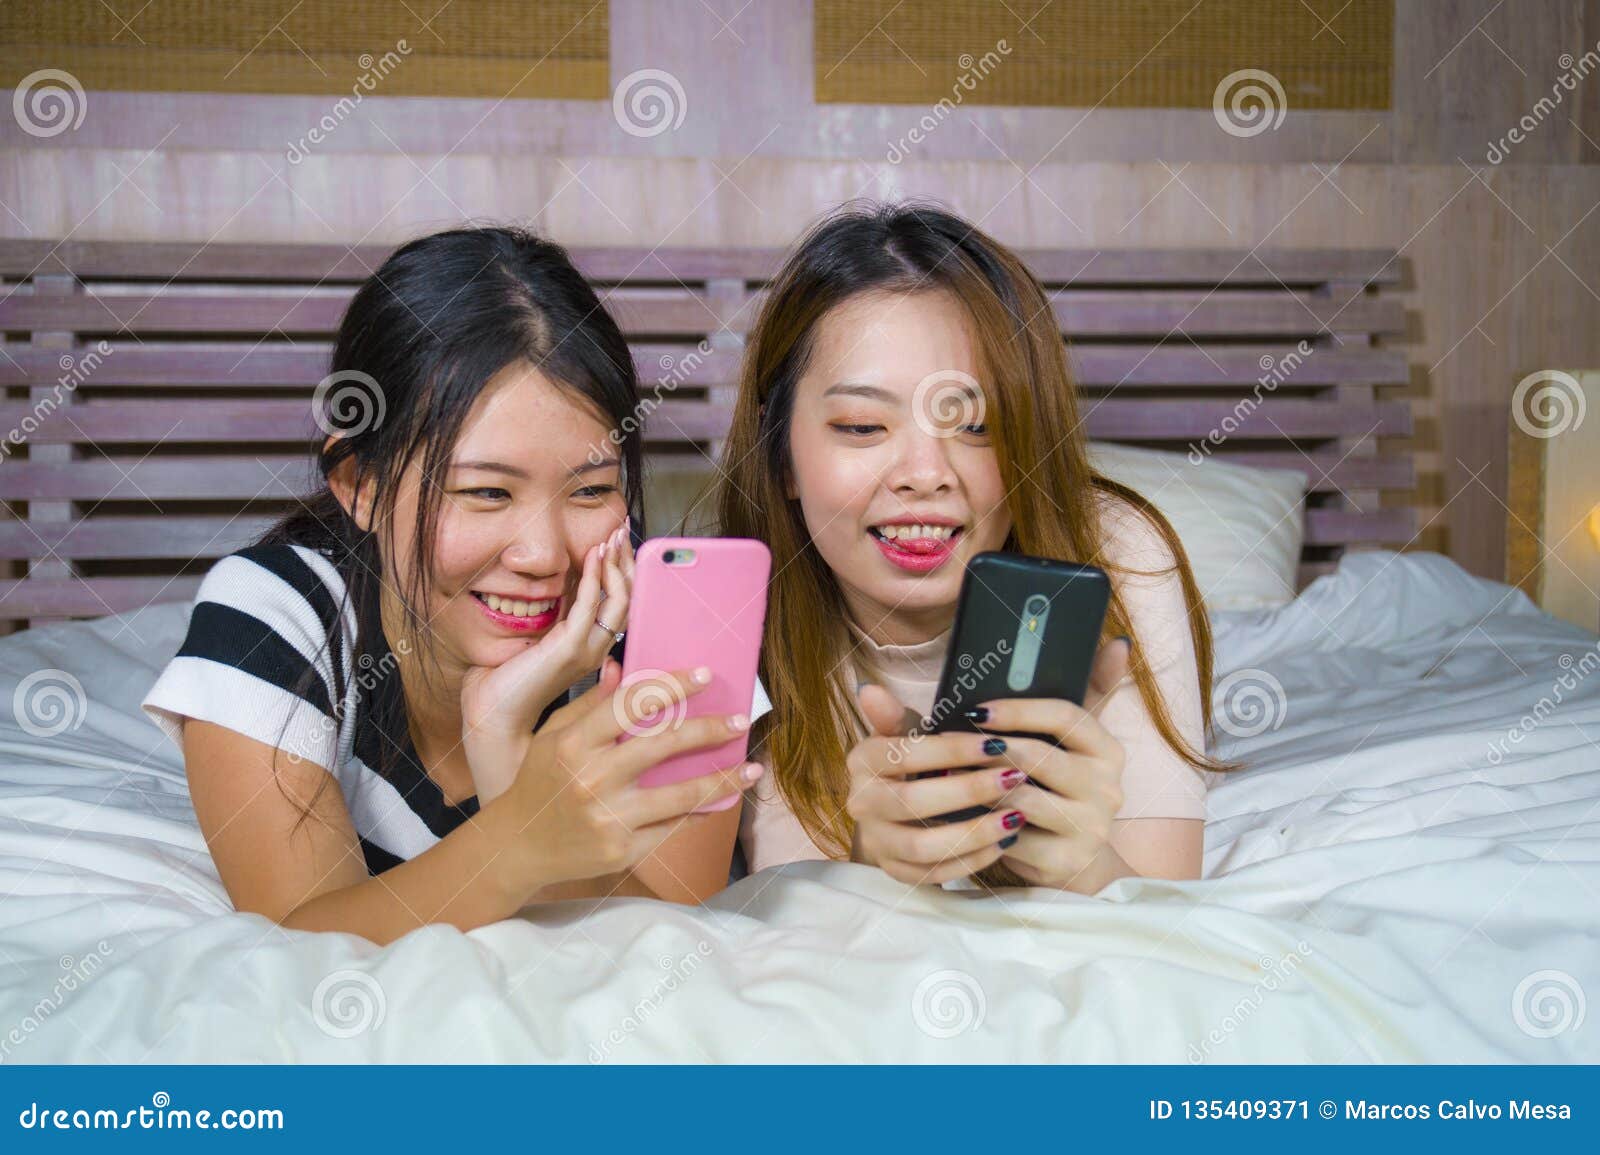 https://thumbs.dreamstime.com/z/young-happy-pretty-asian-chinese-girlfriends-sitting-home-bedroom-laughing-talking-having-fun-using-internet-social-two-135409371.jpg